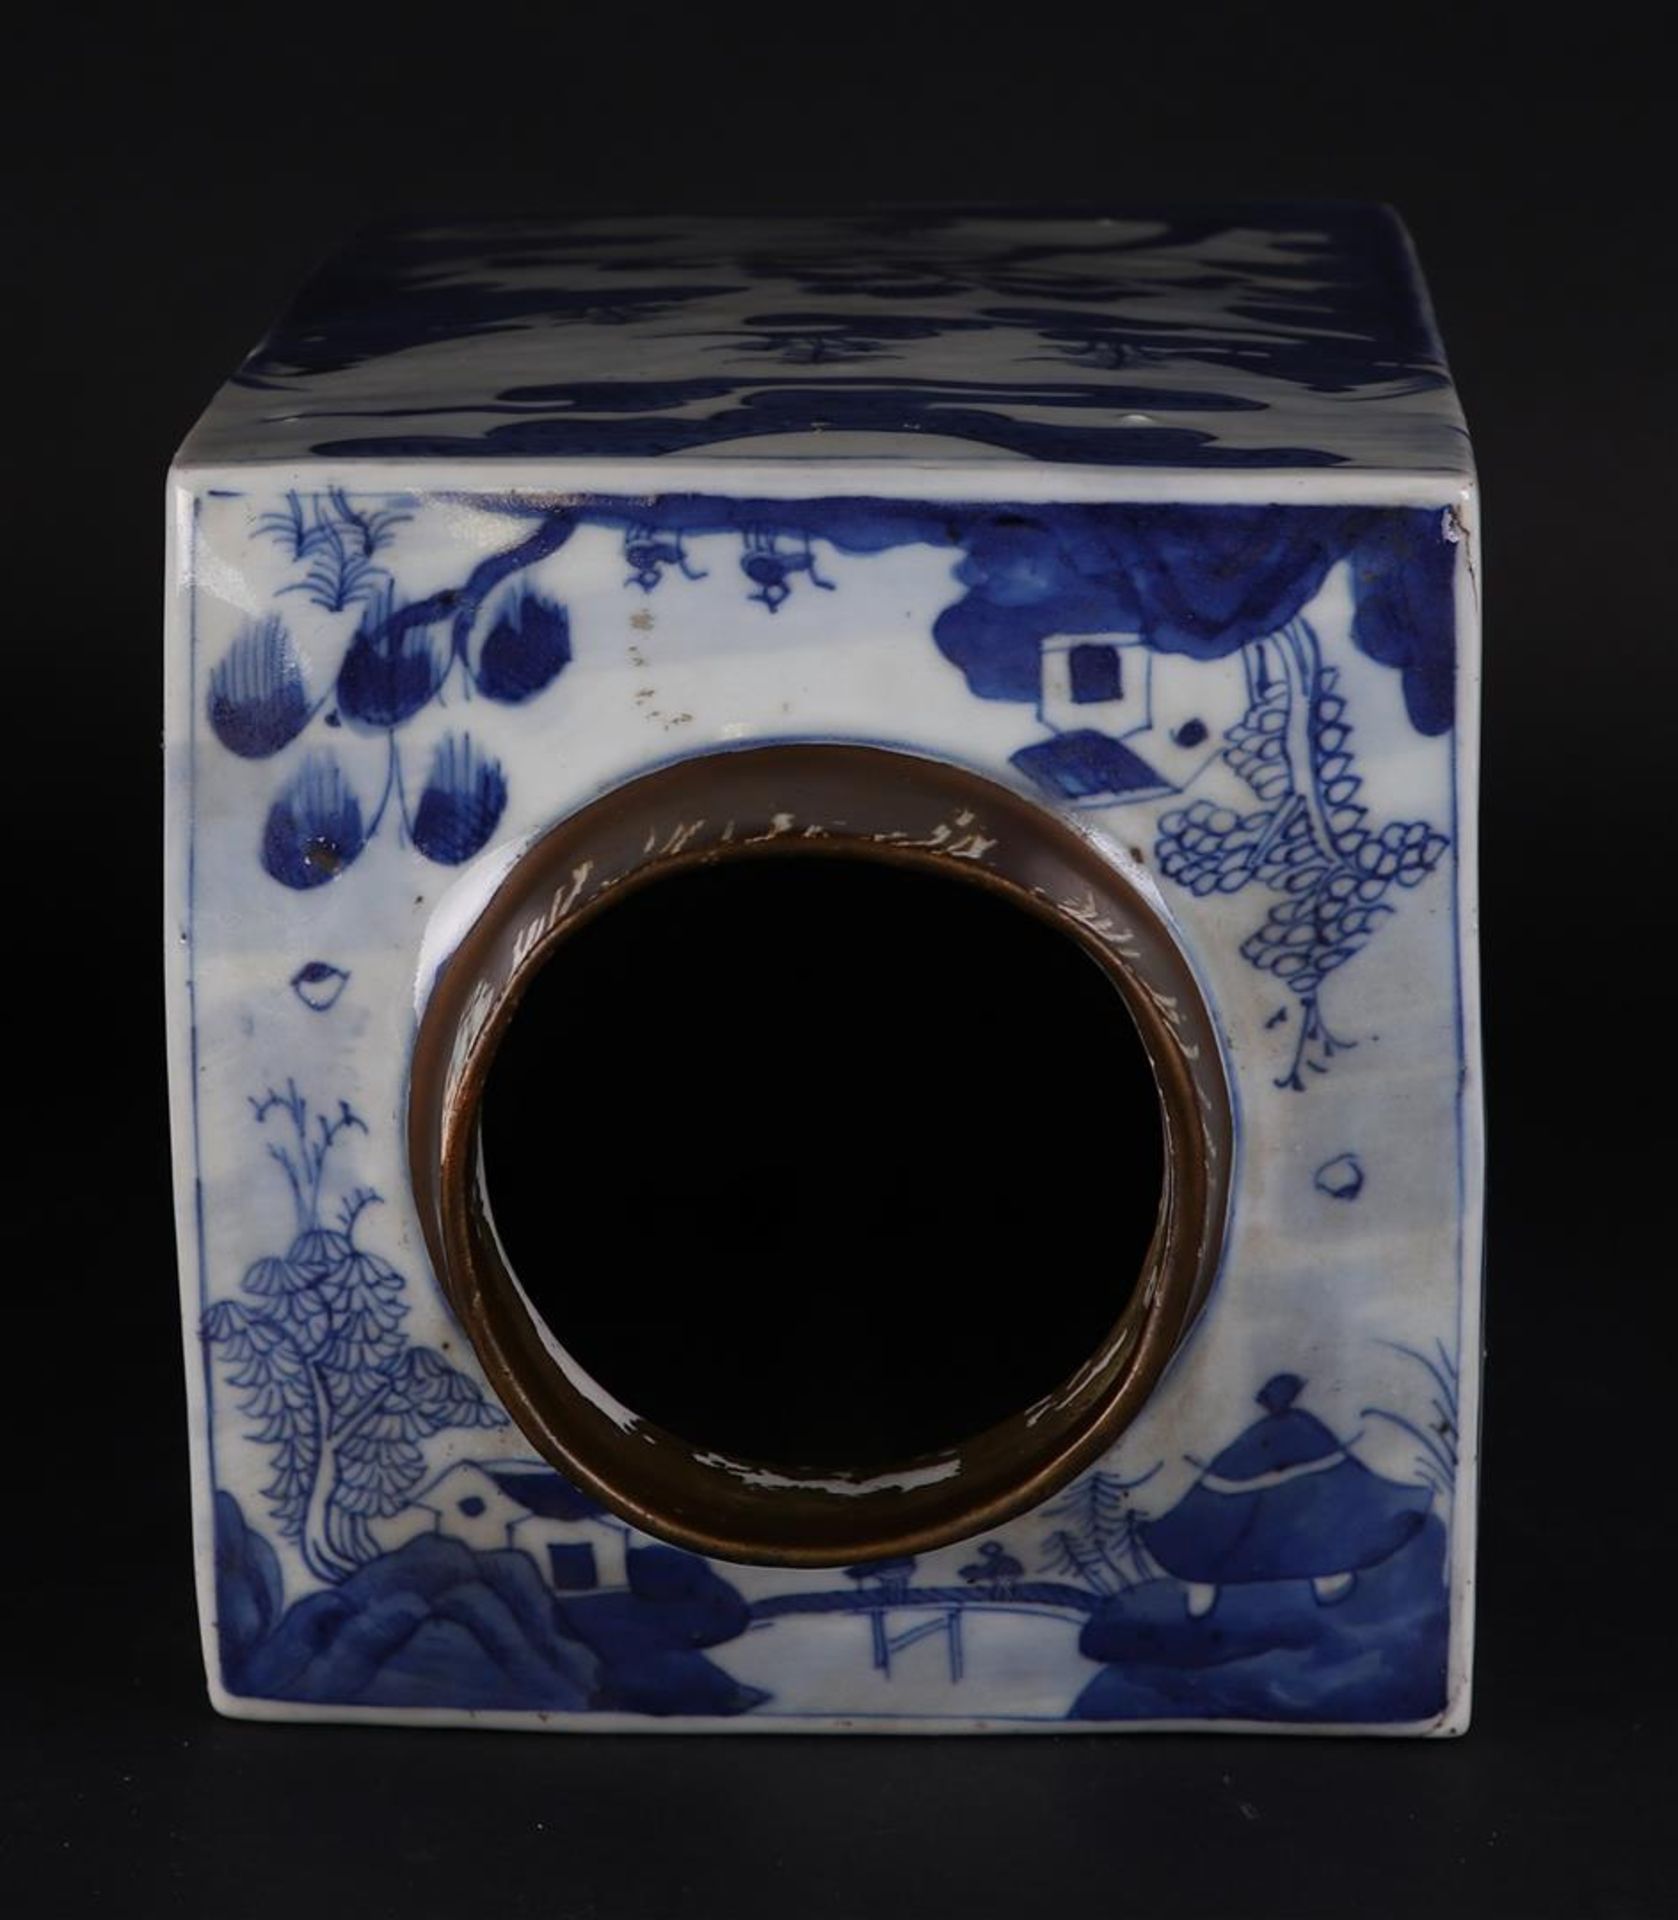 A square porcelain storage jar decorated with various landscapes. China, 19th century. - Image 5 of 6